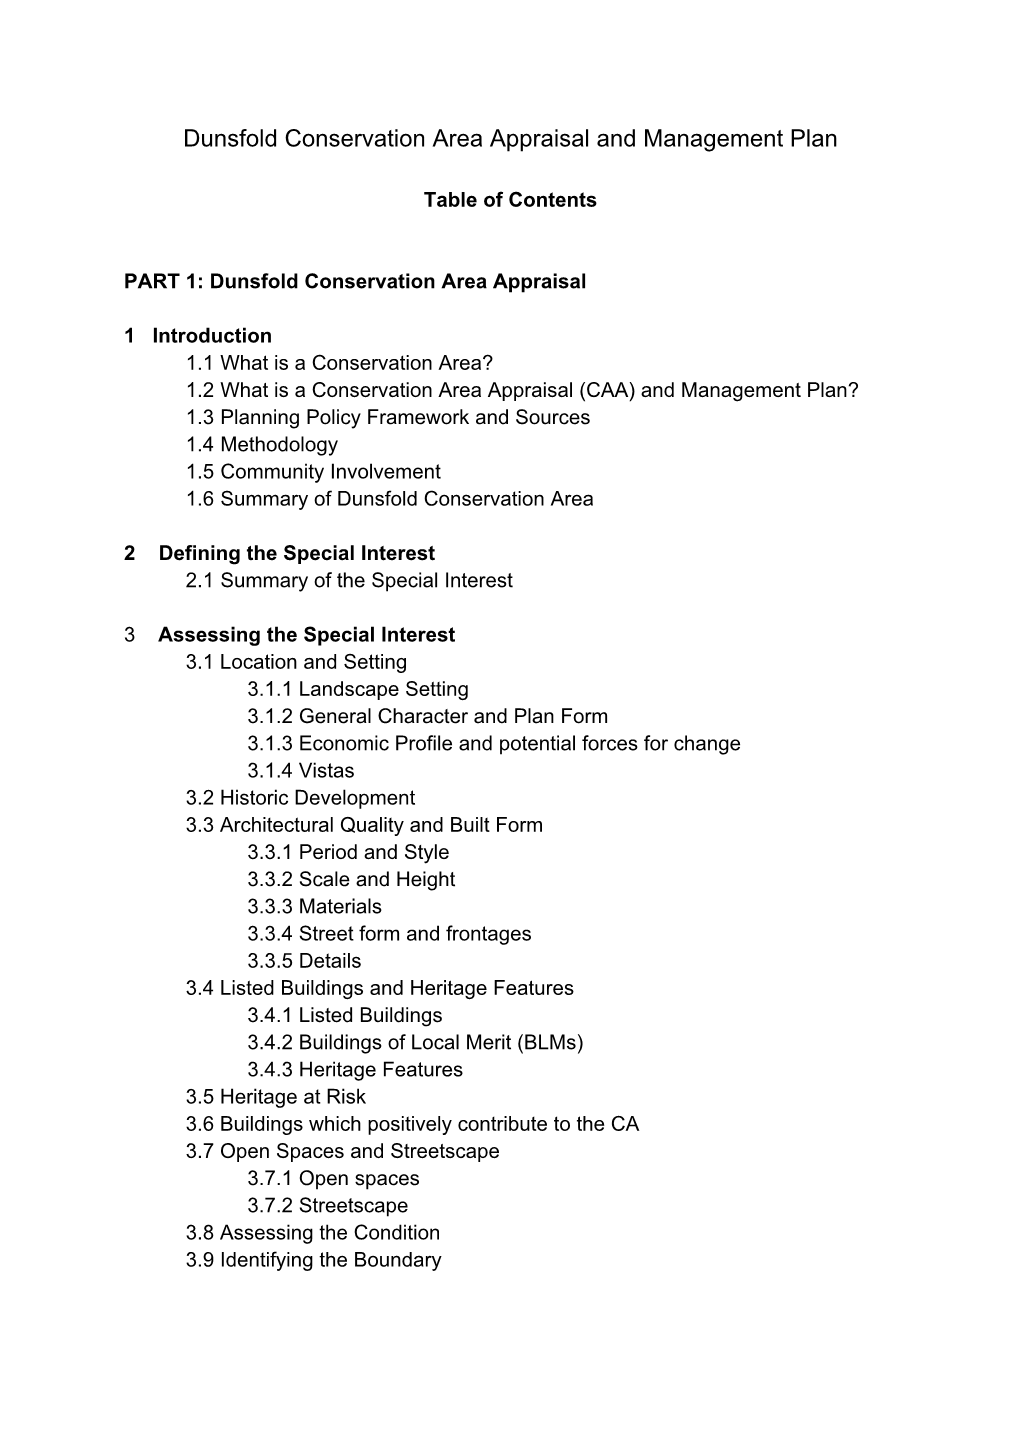 Dunsfold Conservation Area Appraisal and Management Plan